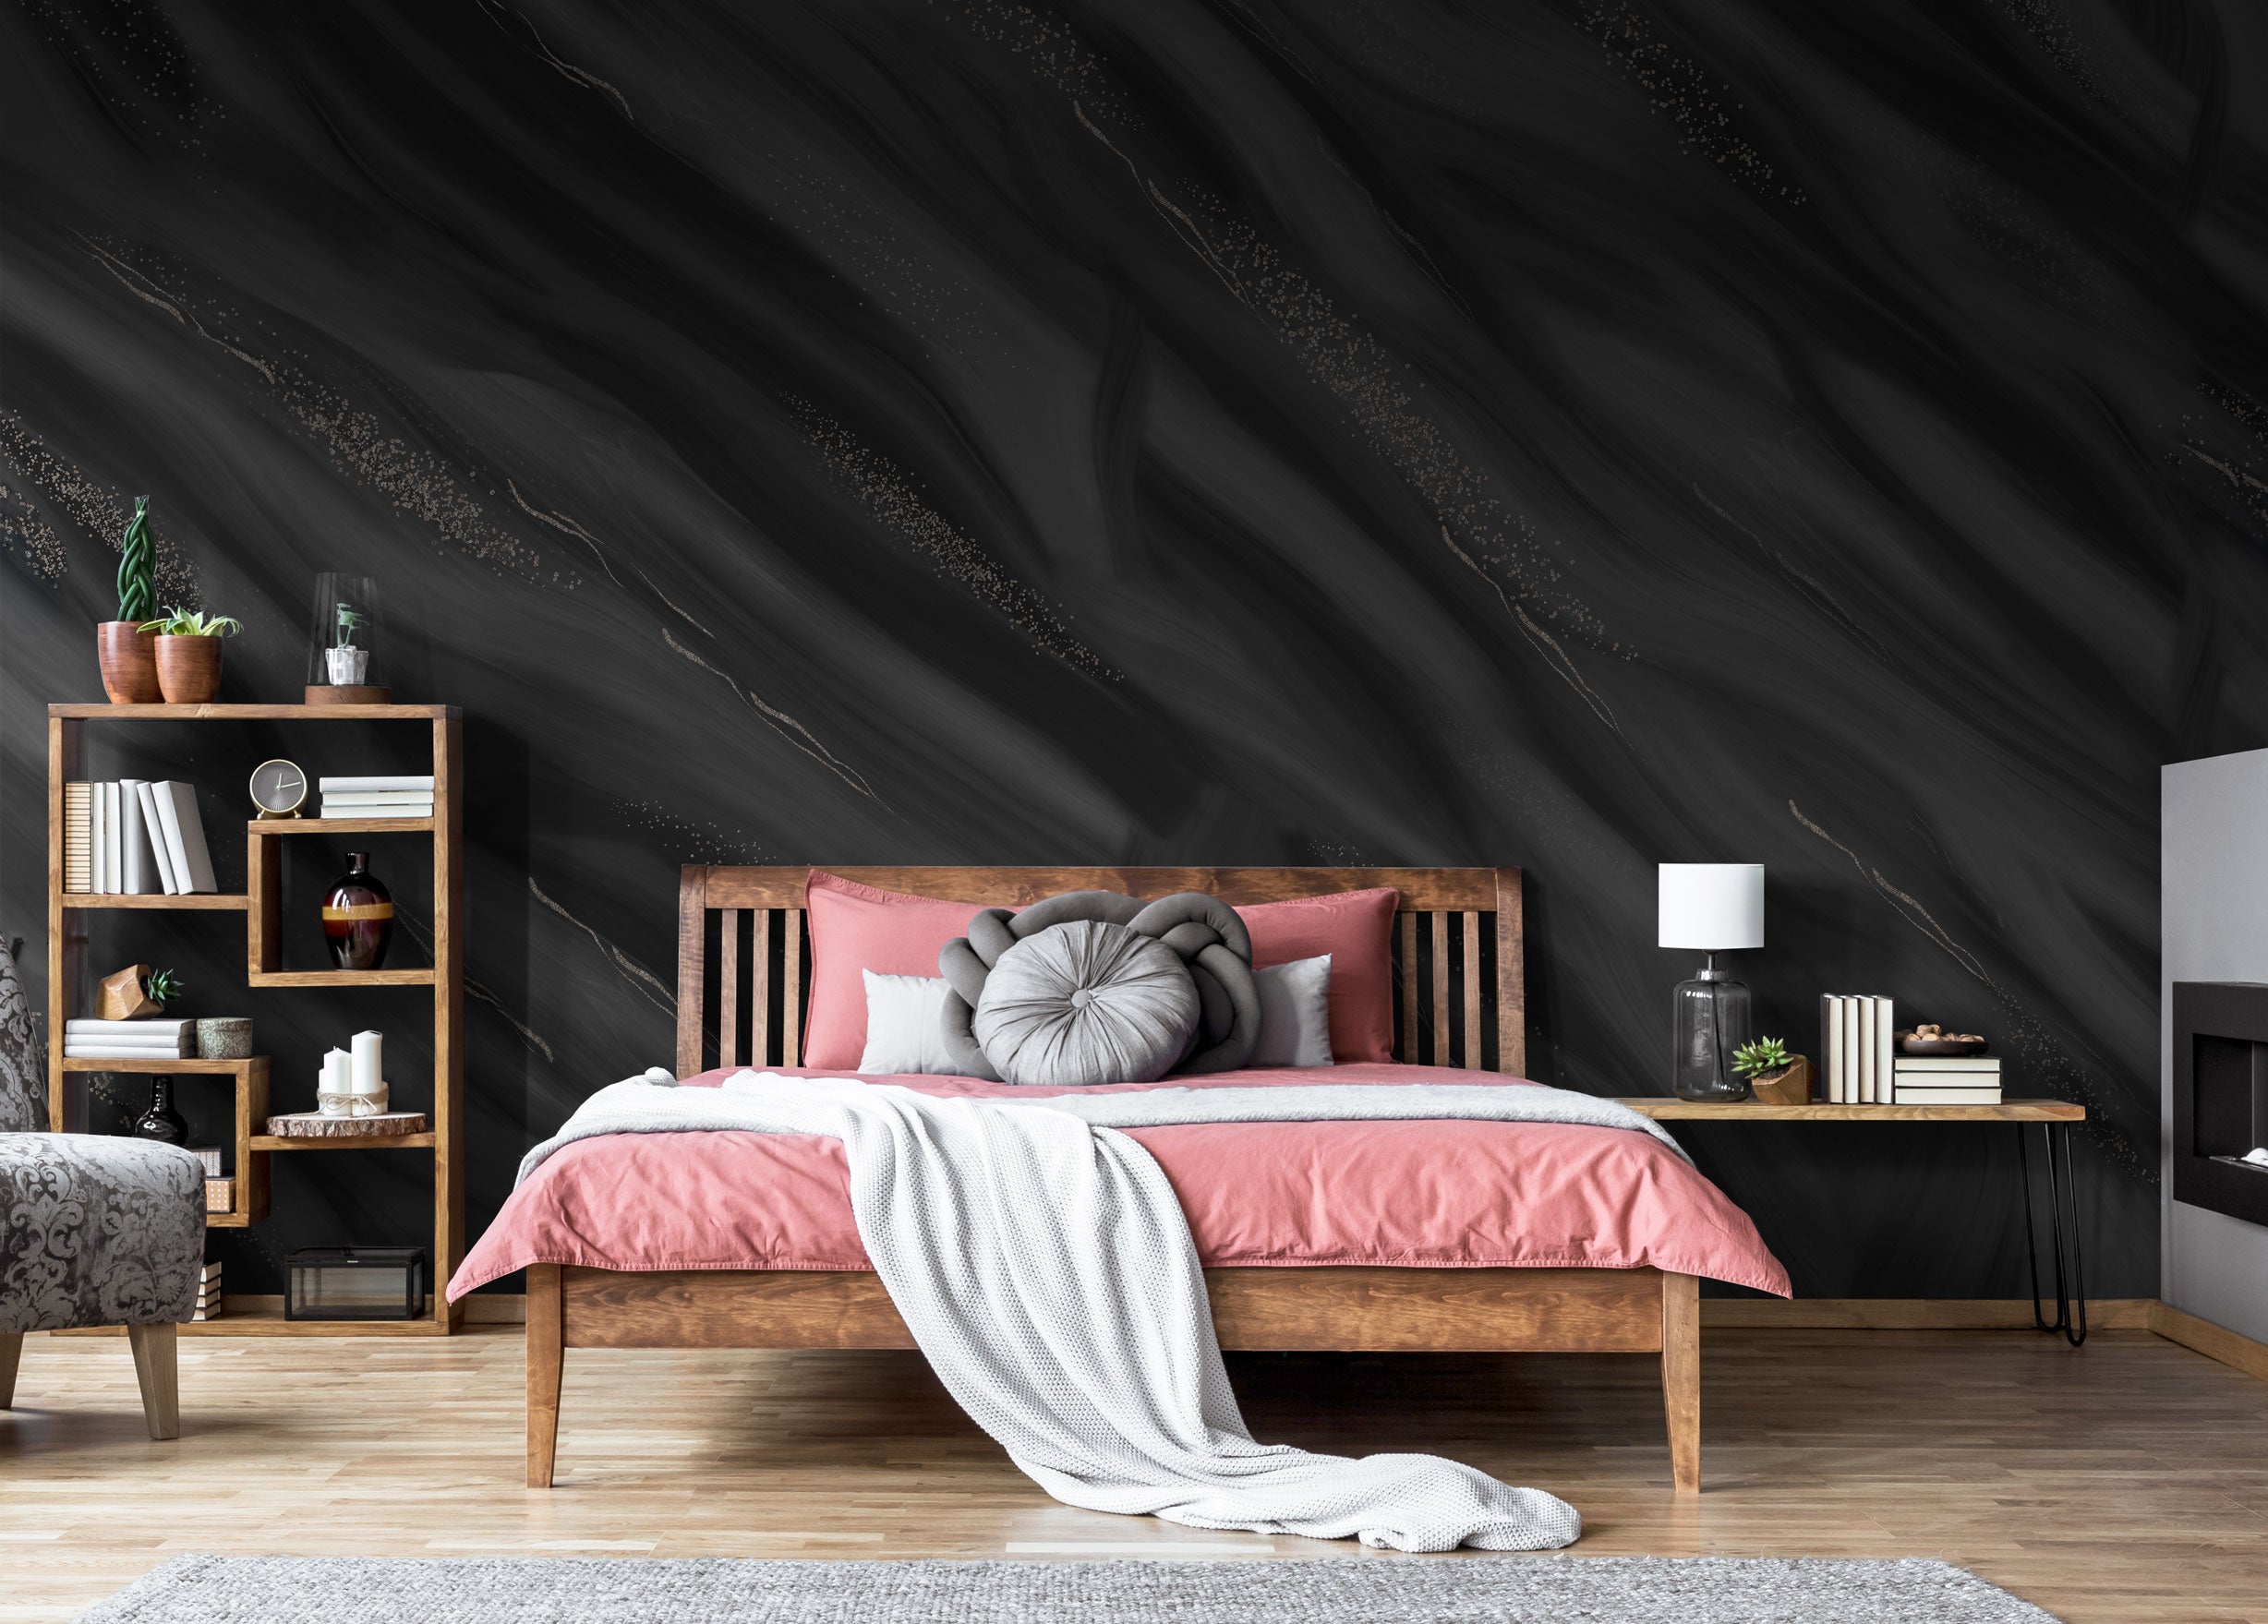 Midnight Mood Wallpaper Wallpaper - The Kail Lowry Line from WALL BLUSH